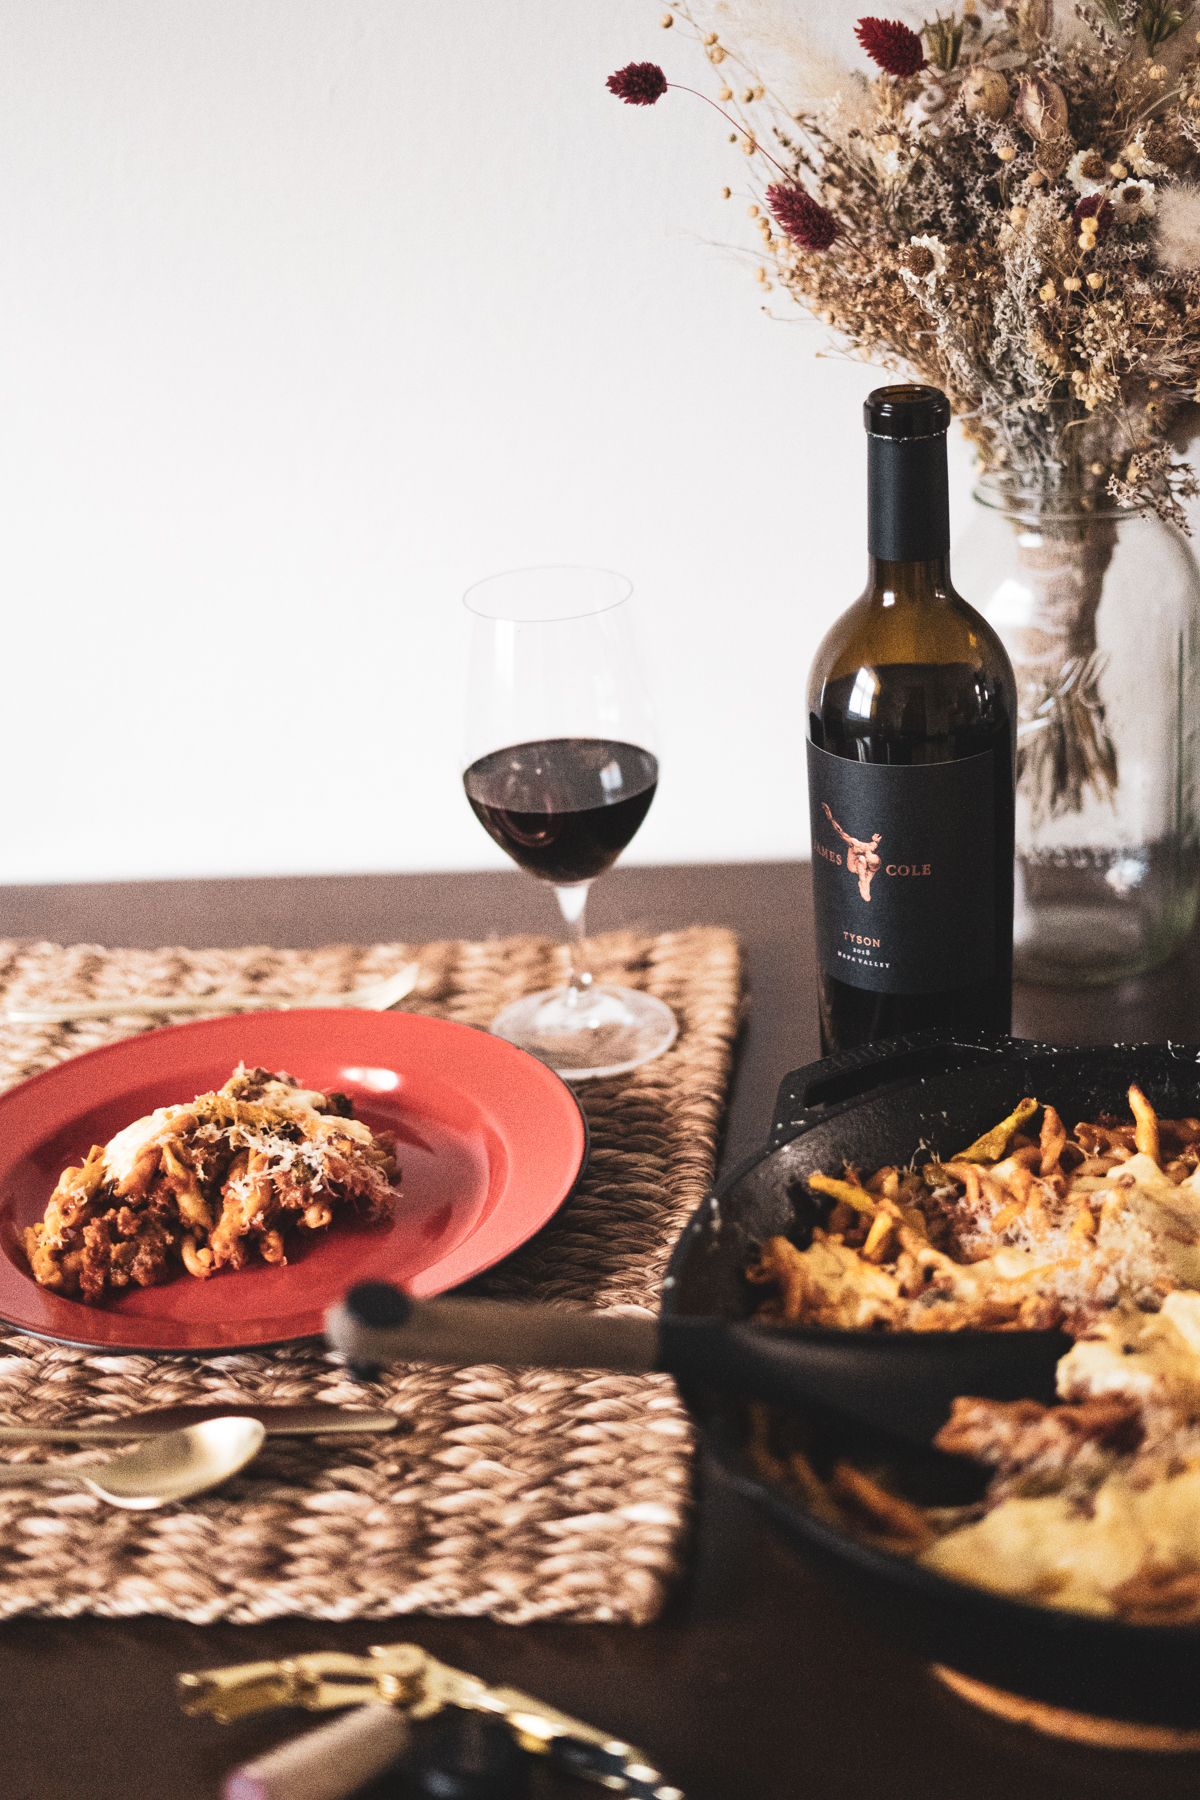 Baked Ziti with James Cole 2018 Tyson Red Wine